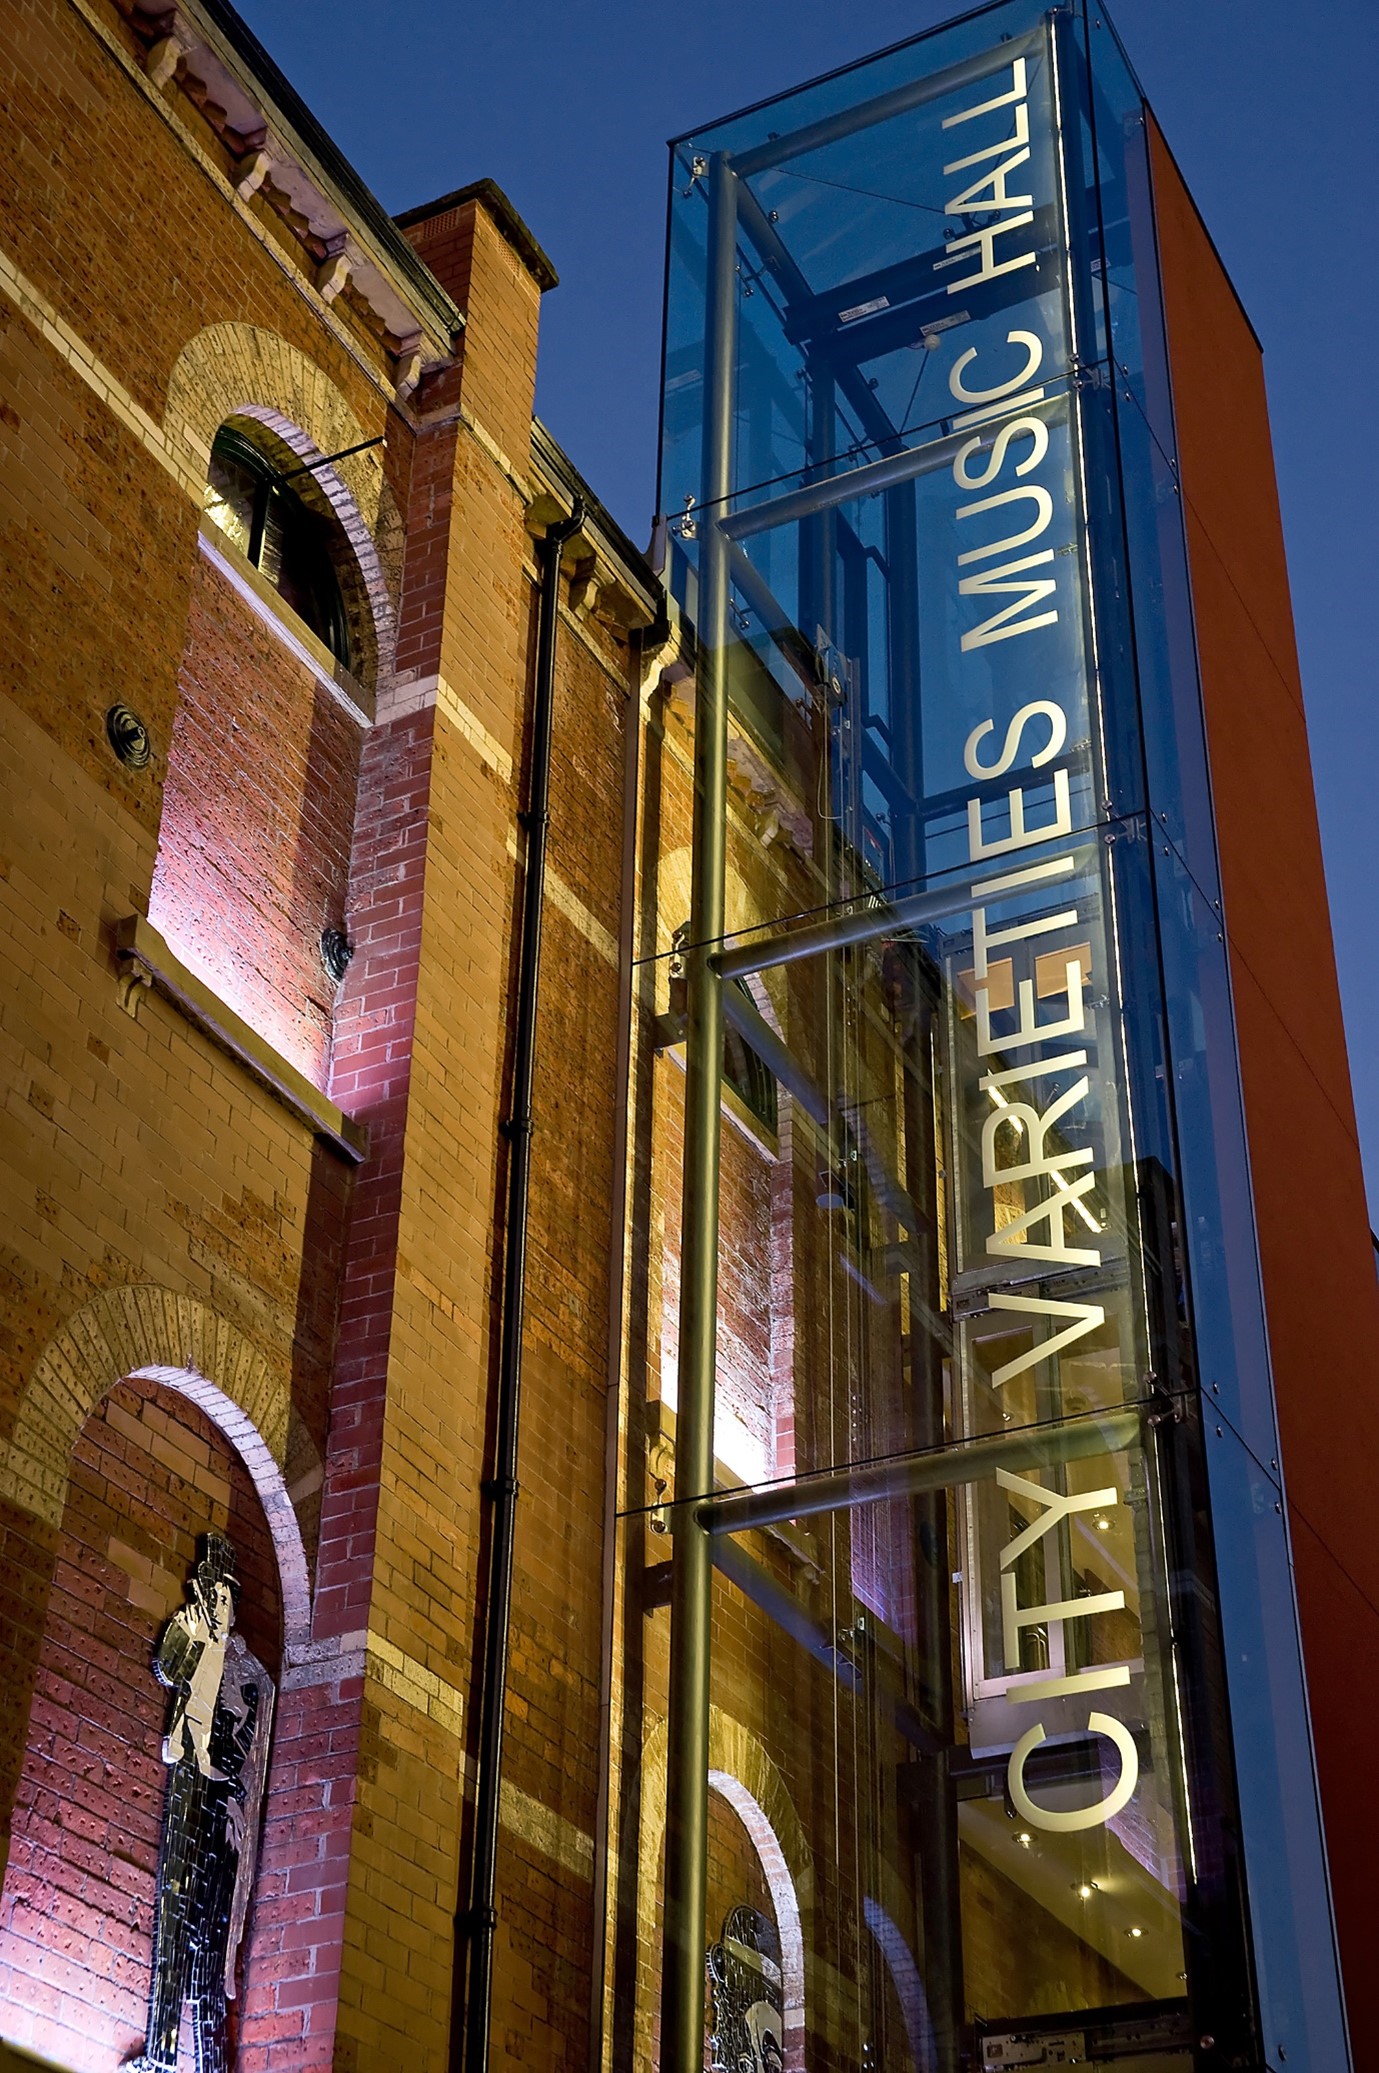 Image of the front of the City Varieties Music Hall in Leeds